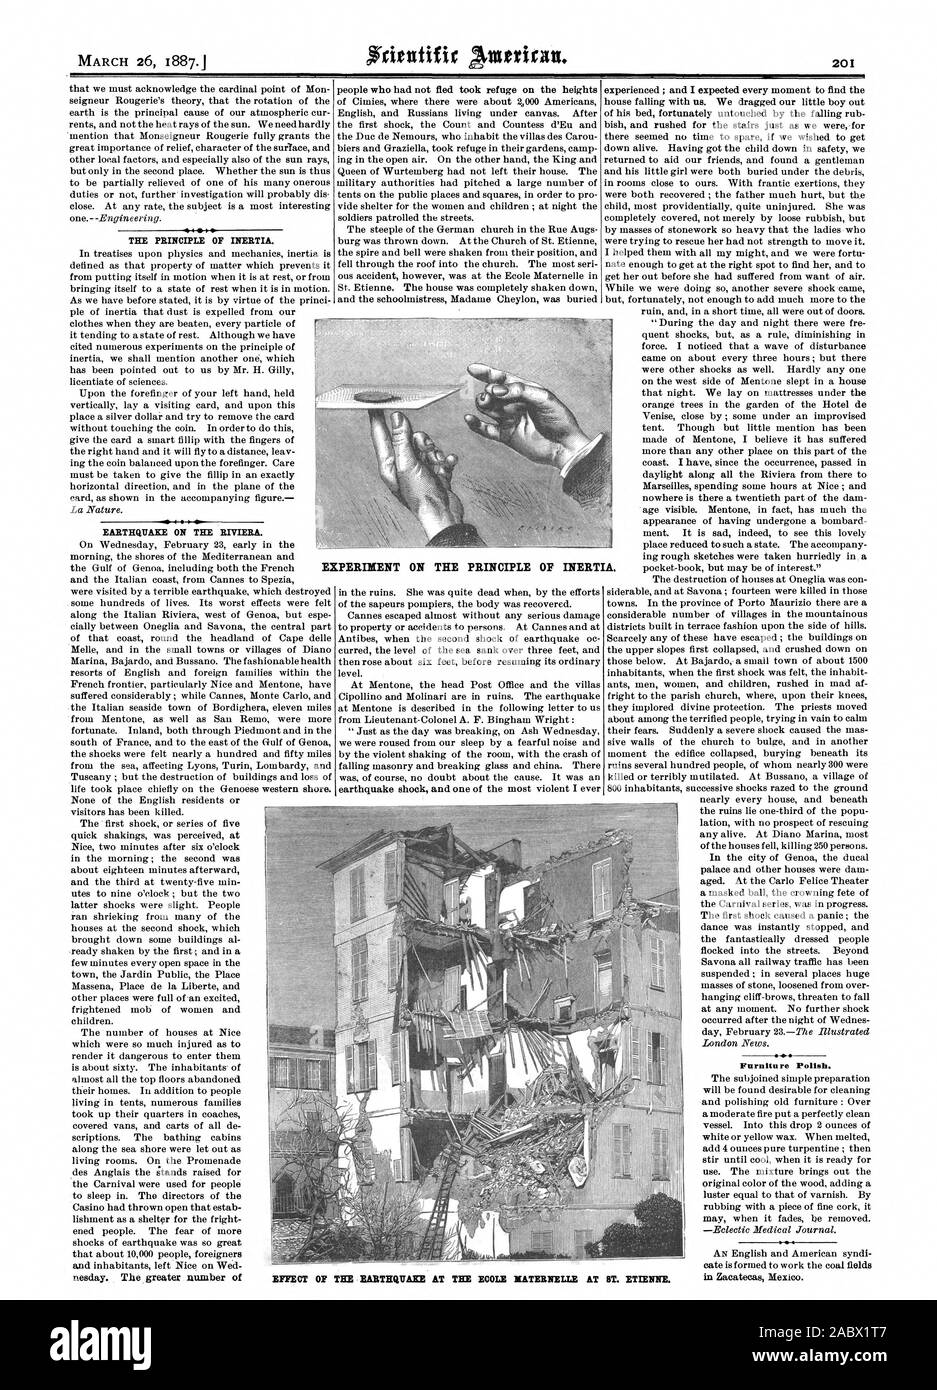 EXPERIMENT ON THE PRINCIPLE OF INERTIA. THE PRINCIPLE OF INERTIA. VII 4  EARTHQUAKE ON THE RIVIERA. Furniture Polish. EFFECT OF THE EARTHQUAKE AT THE ECOLE HATERNELLE AT BT. ETIENNE., scientific american, 1887-03-26 Stock Photo